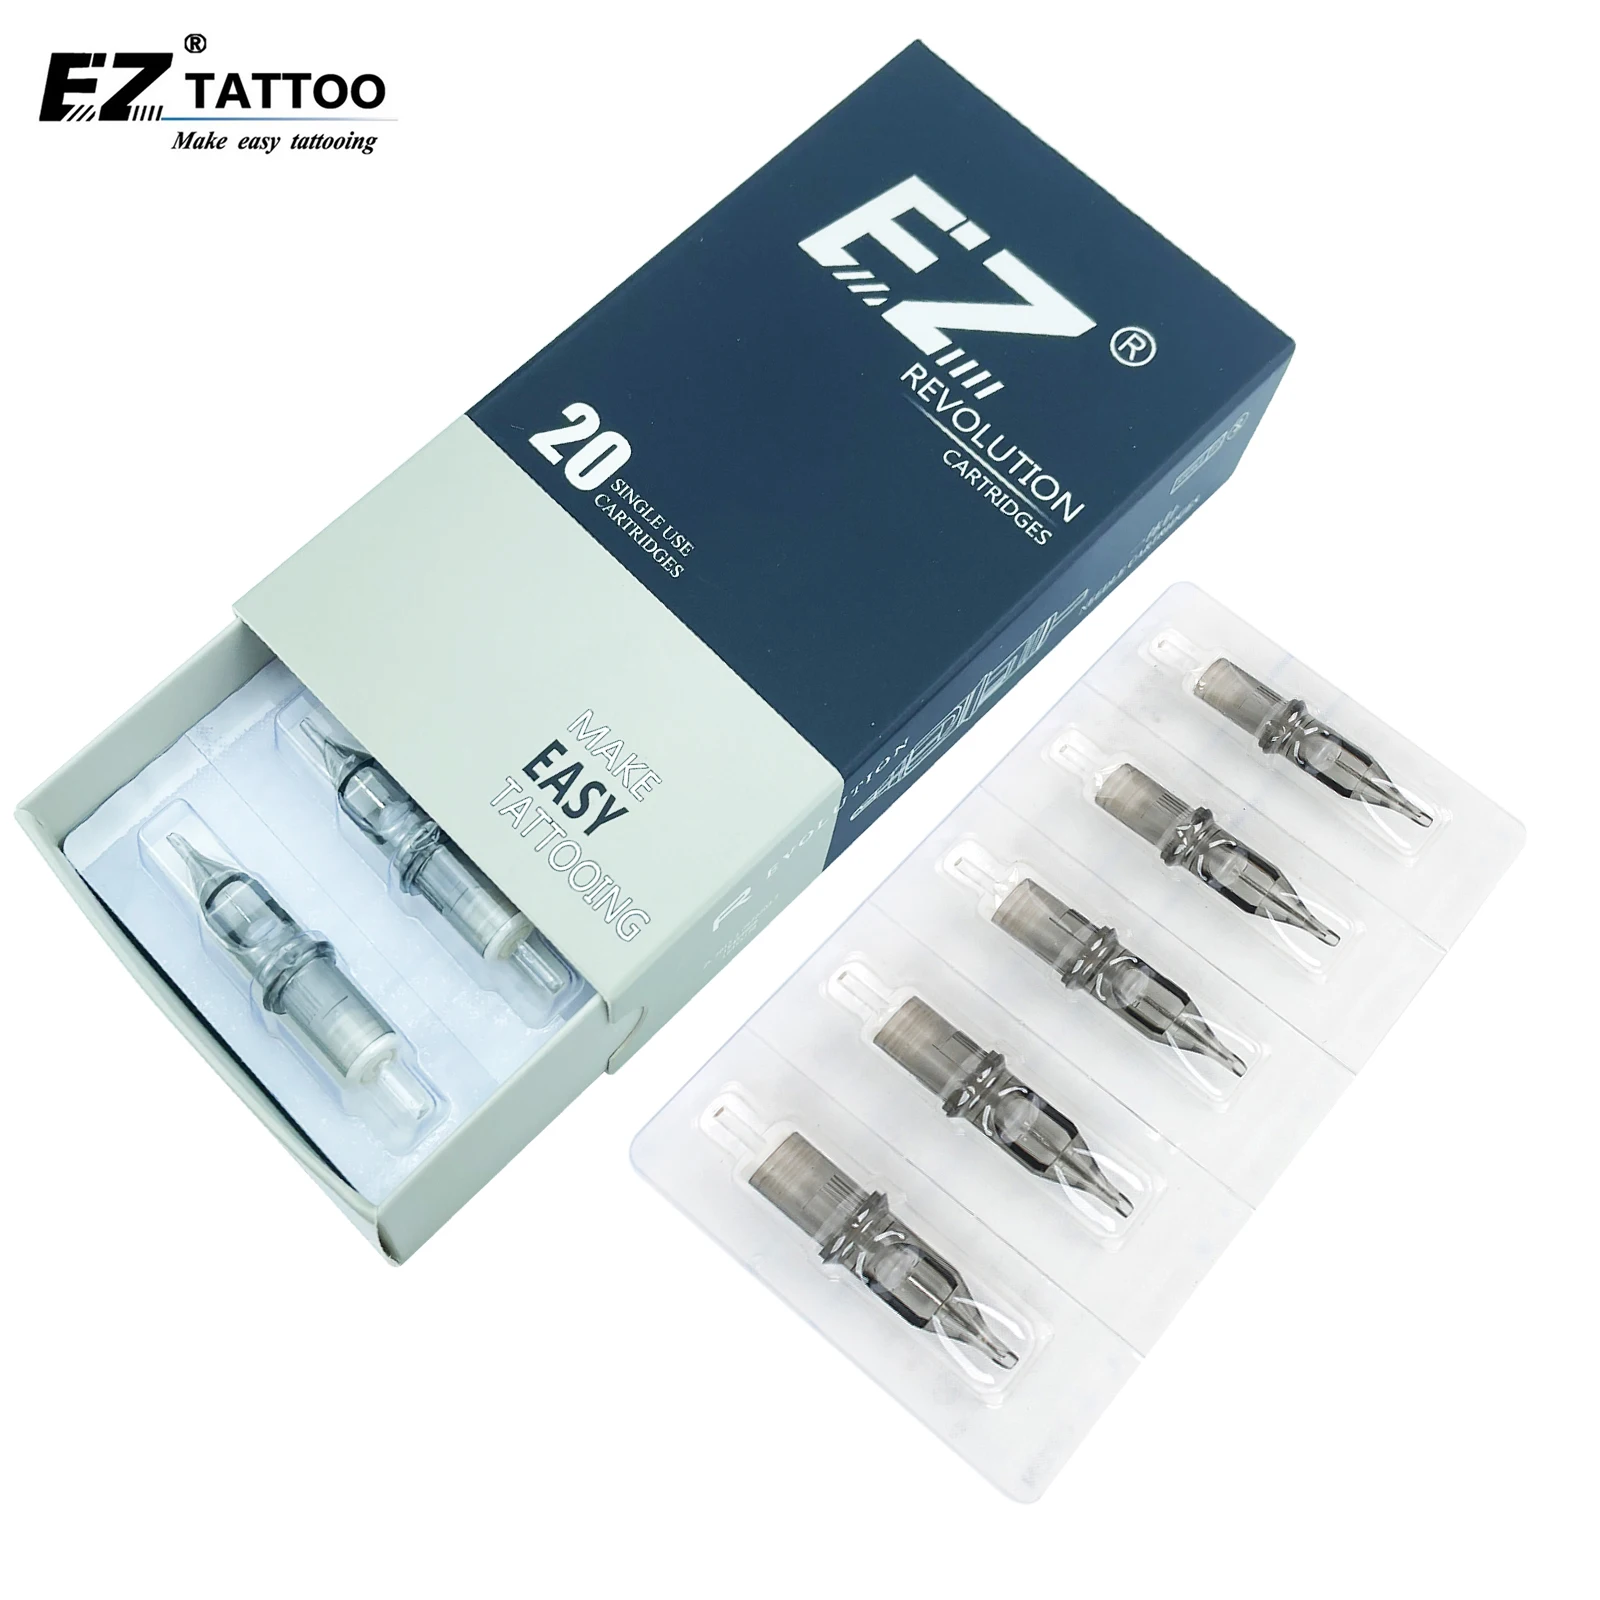 

RC1409RLT EZ Tattoo Needles Revolution Cartridge Round Liner #14 0.40mm X-taper 7.0mm for System machines and grips 20 pcs/lot